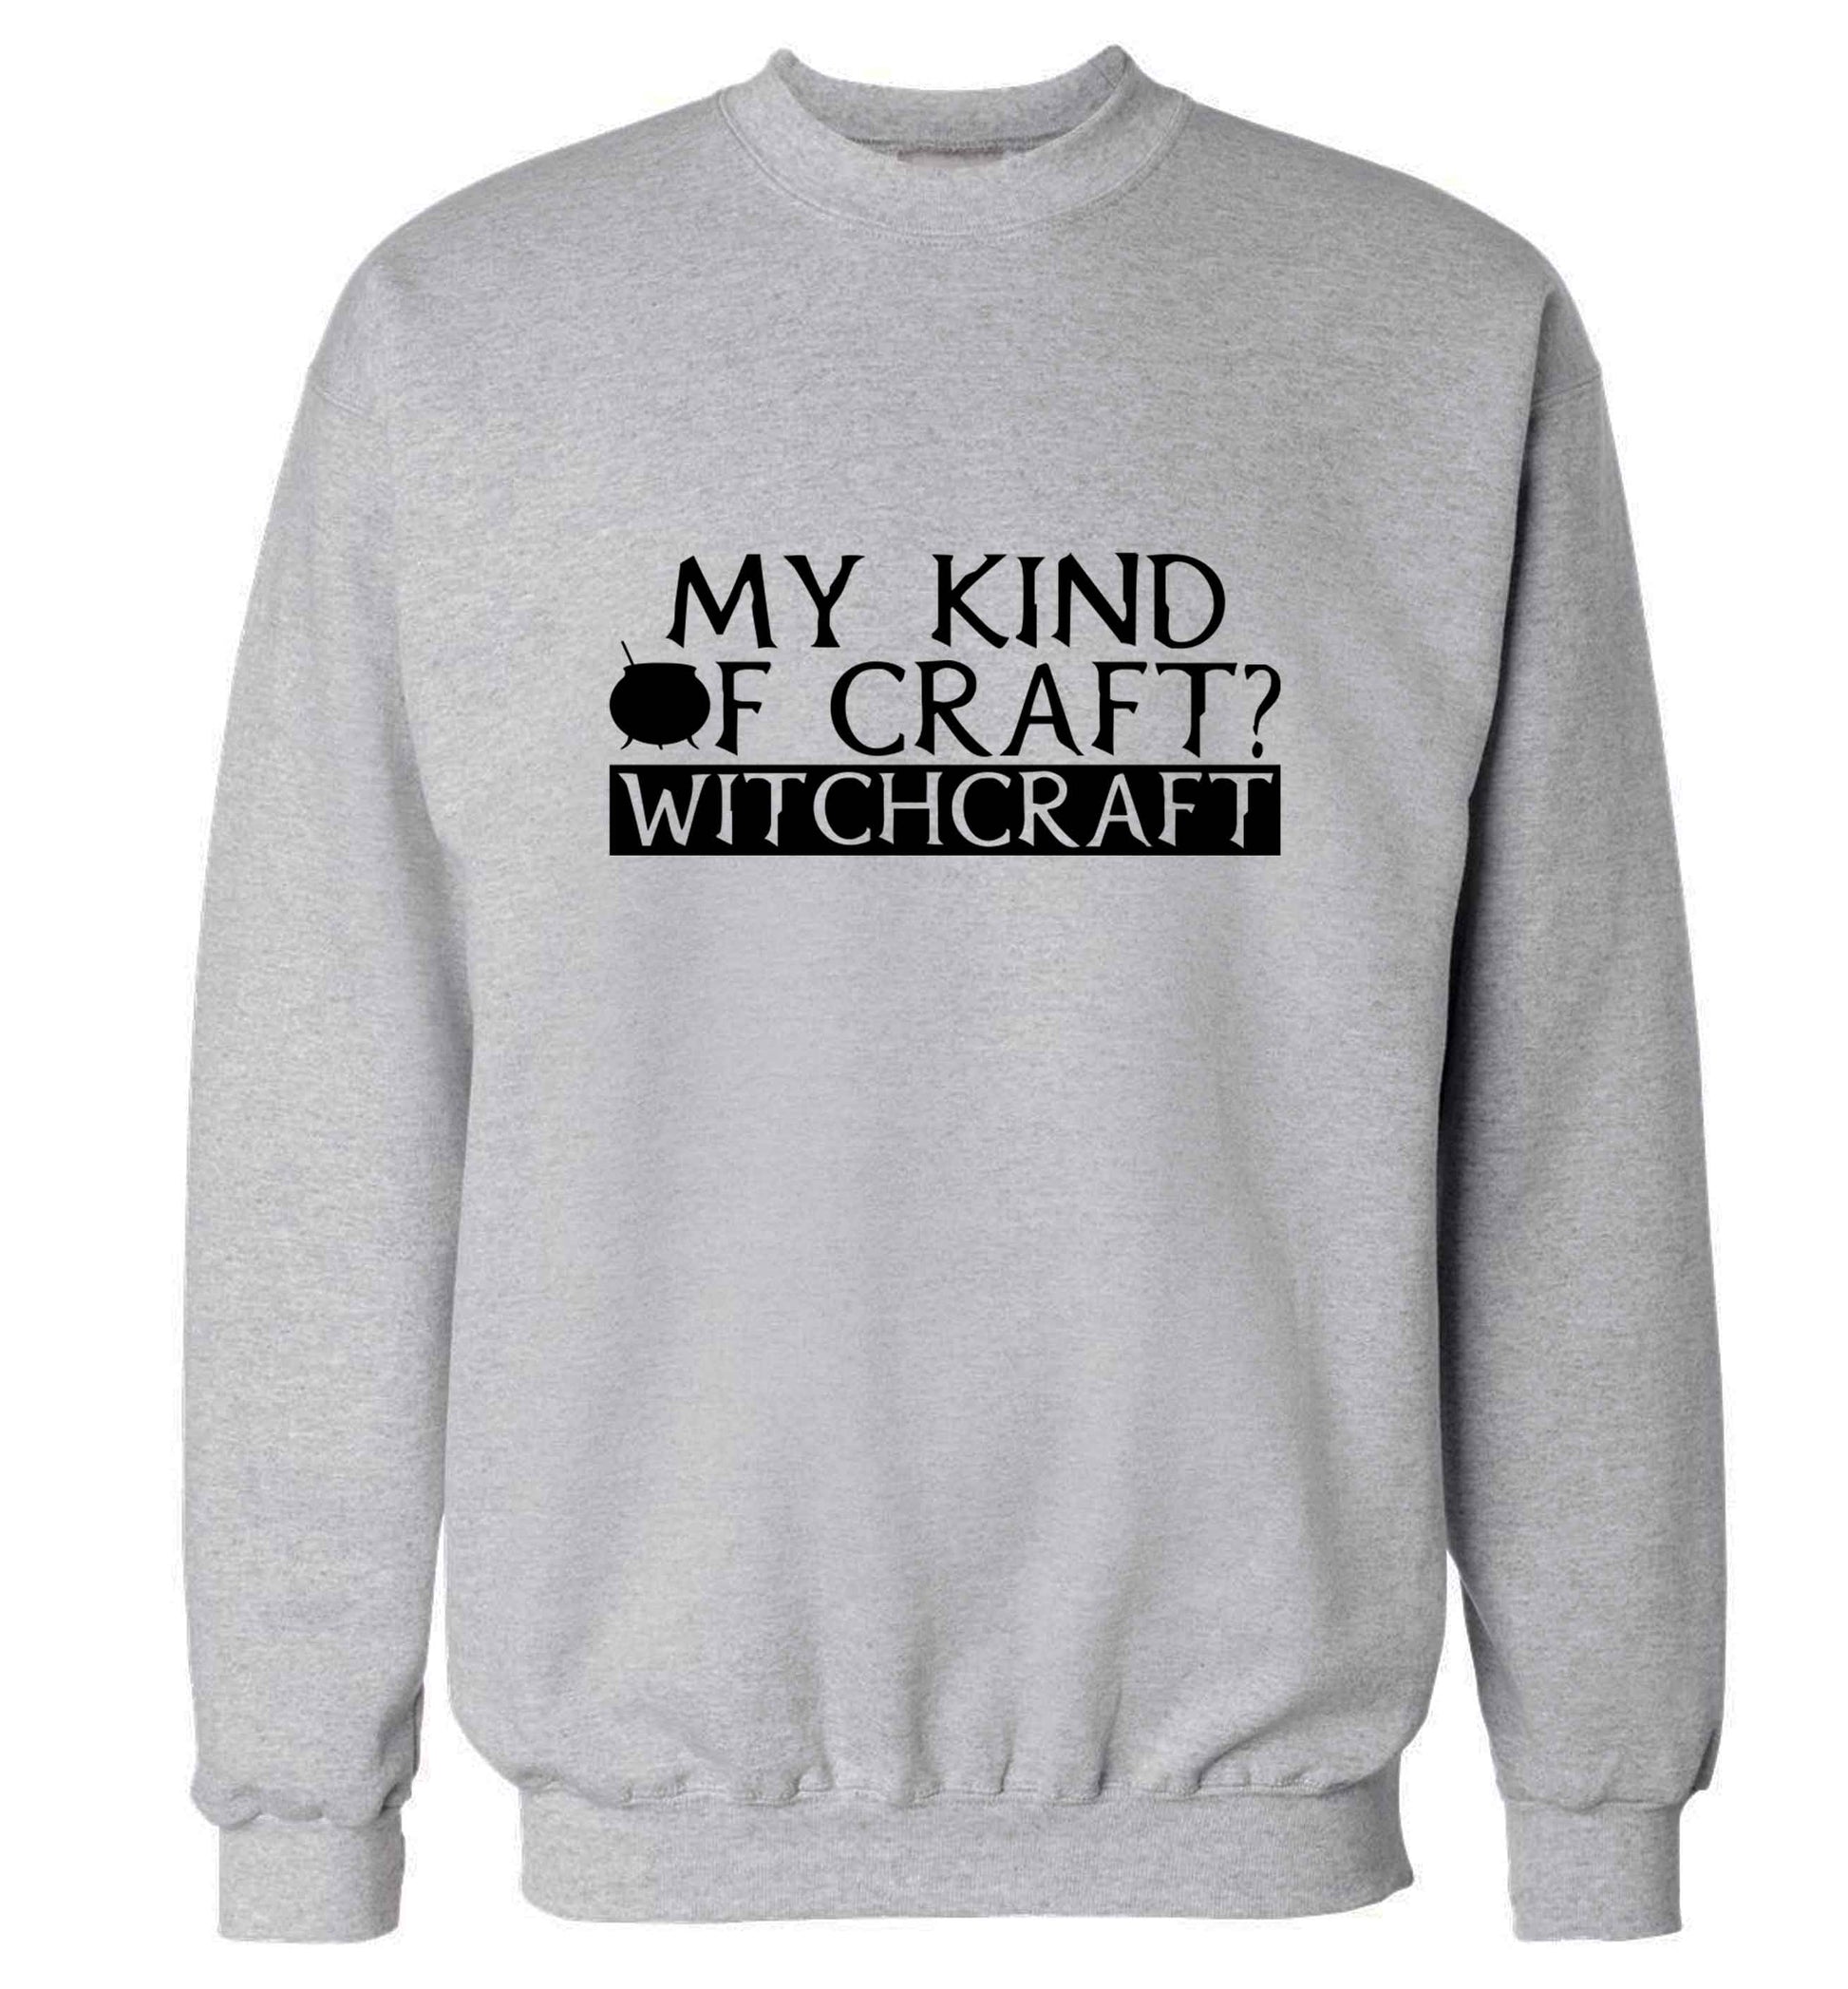 My king of craft? witchcraft  adult's unisex grey sweater 2XL